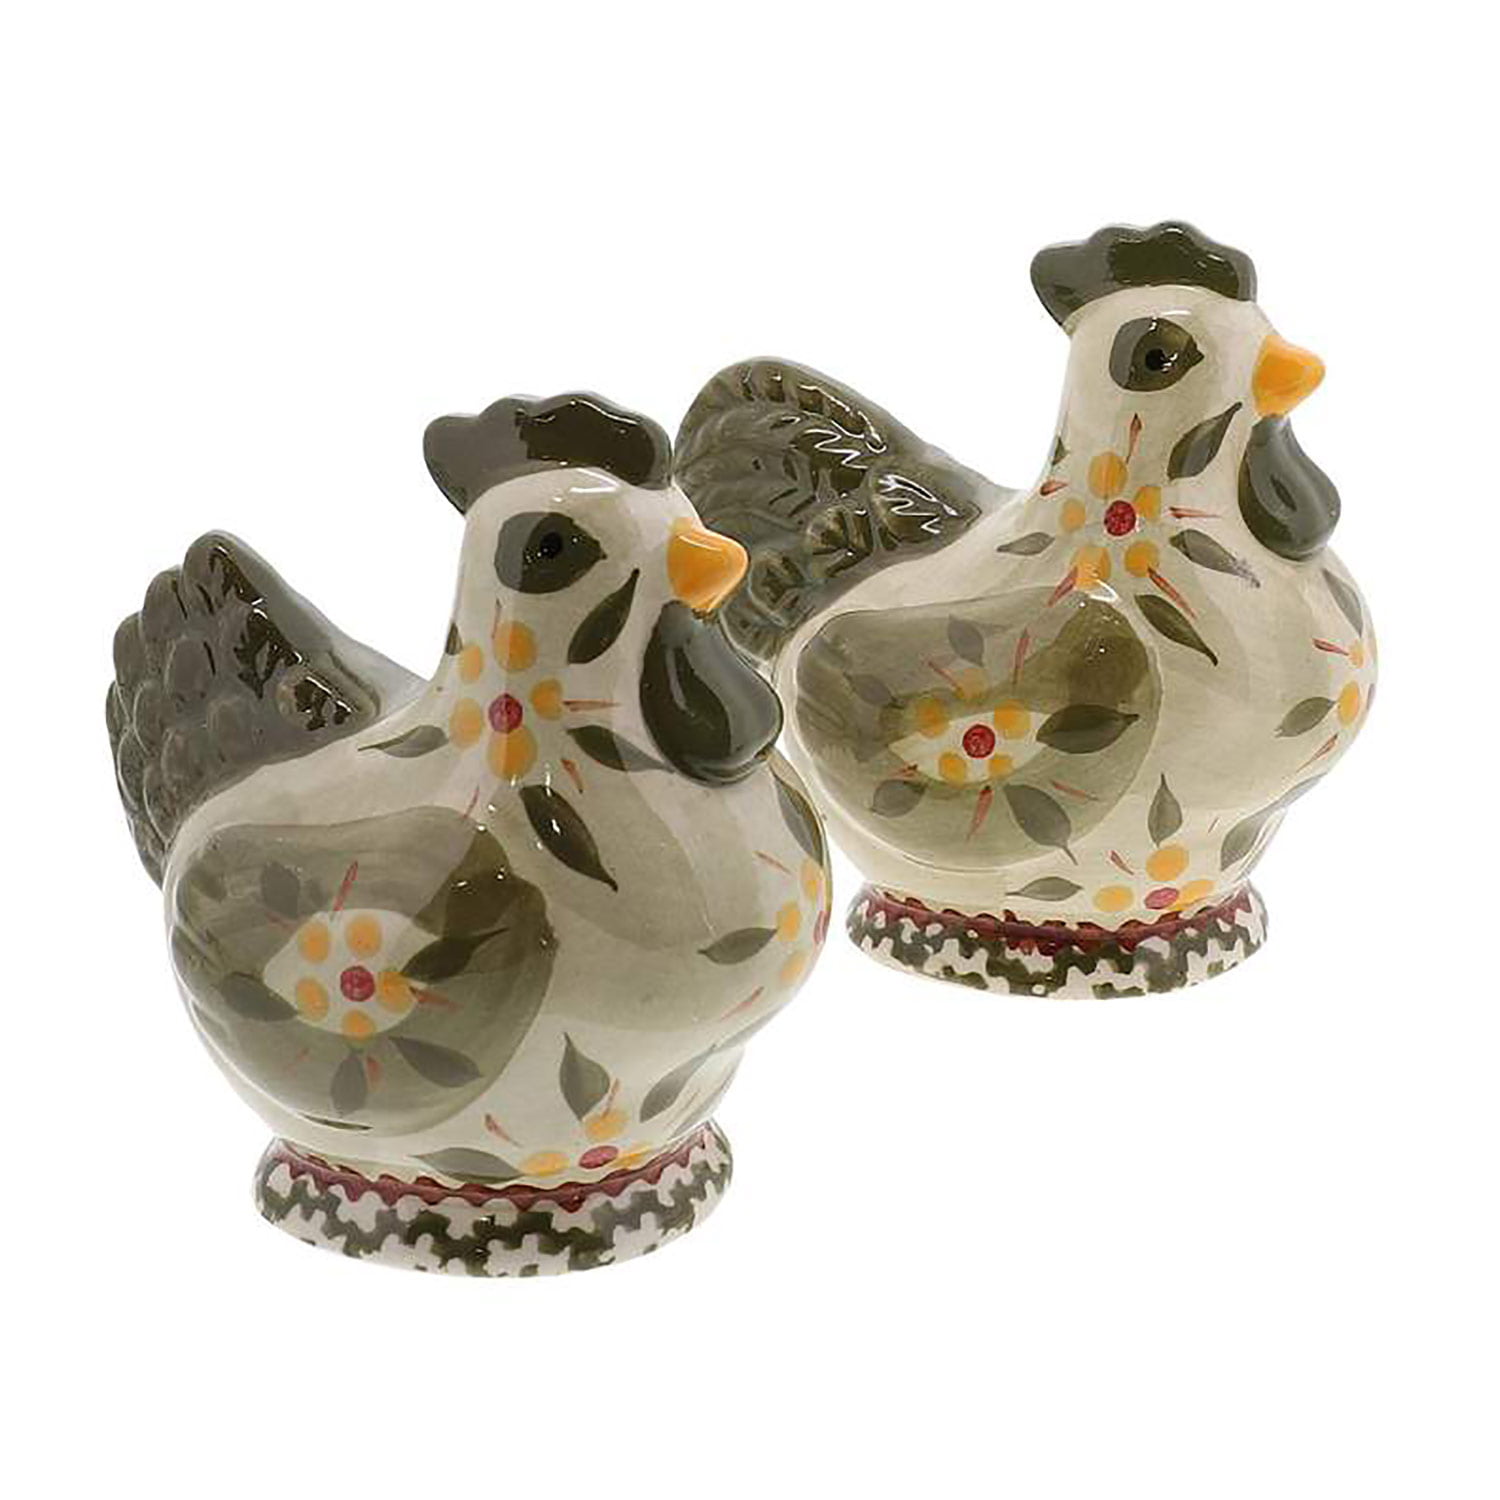 Hen Chicken Salt & Pepper Shakers by Temp-Tations (Olive Green ...